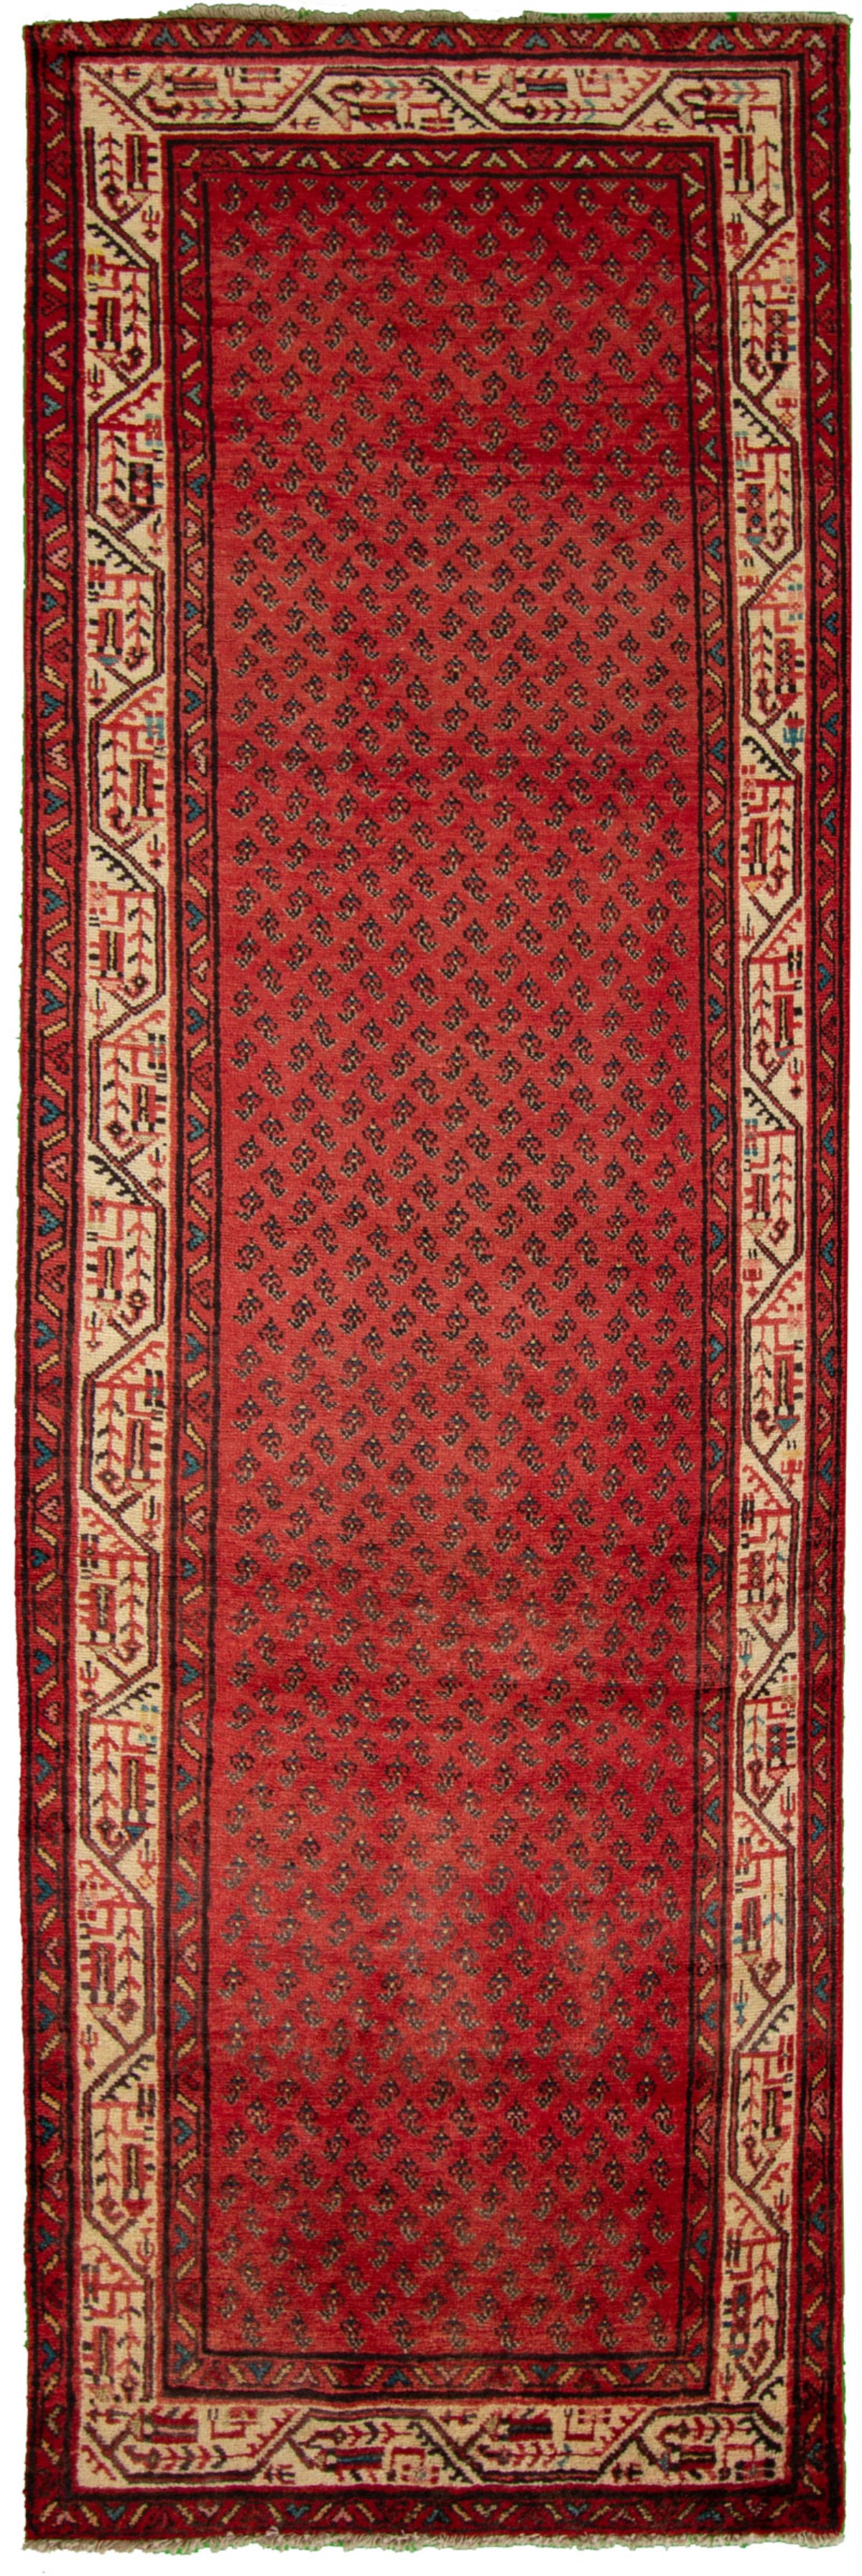 Hand-knotted Arak Red Wool Rug 3'4" x 10'9" Size: 3'4" x 10'9"  